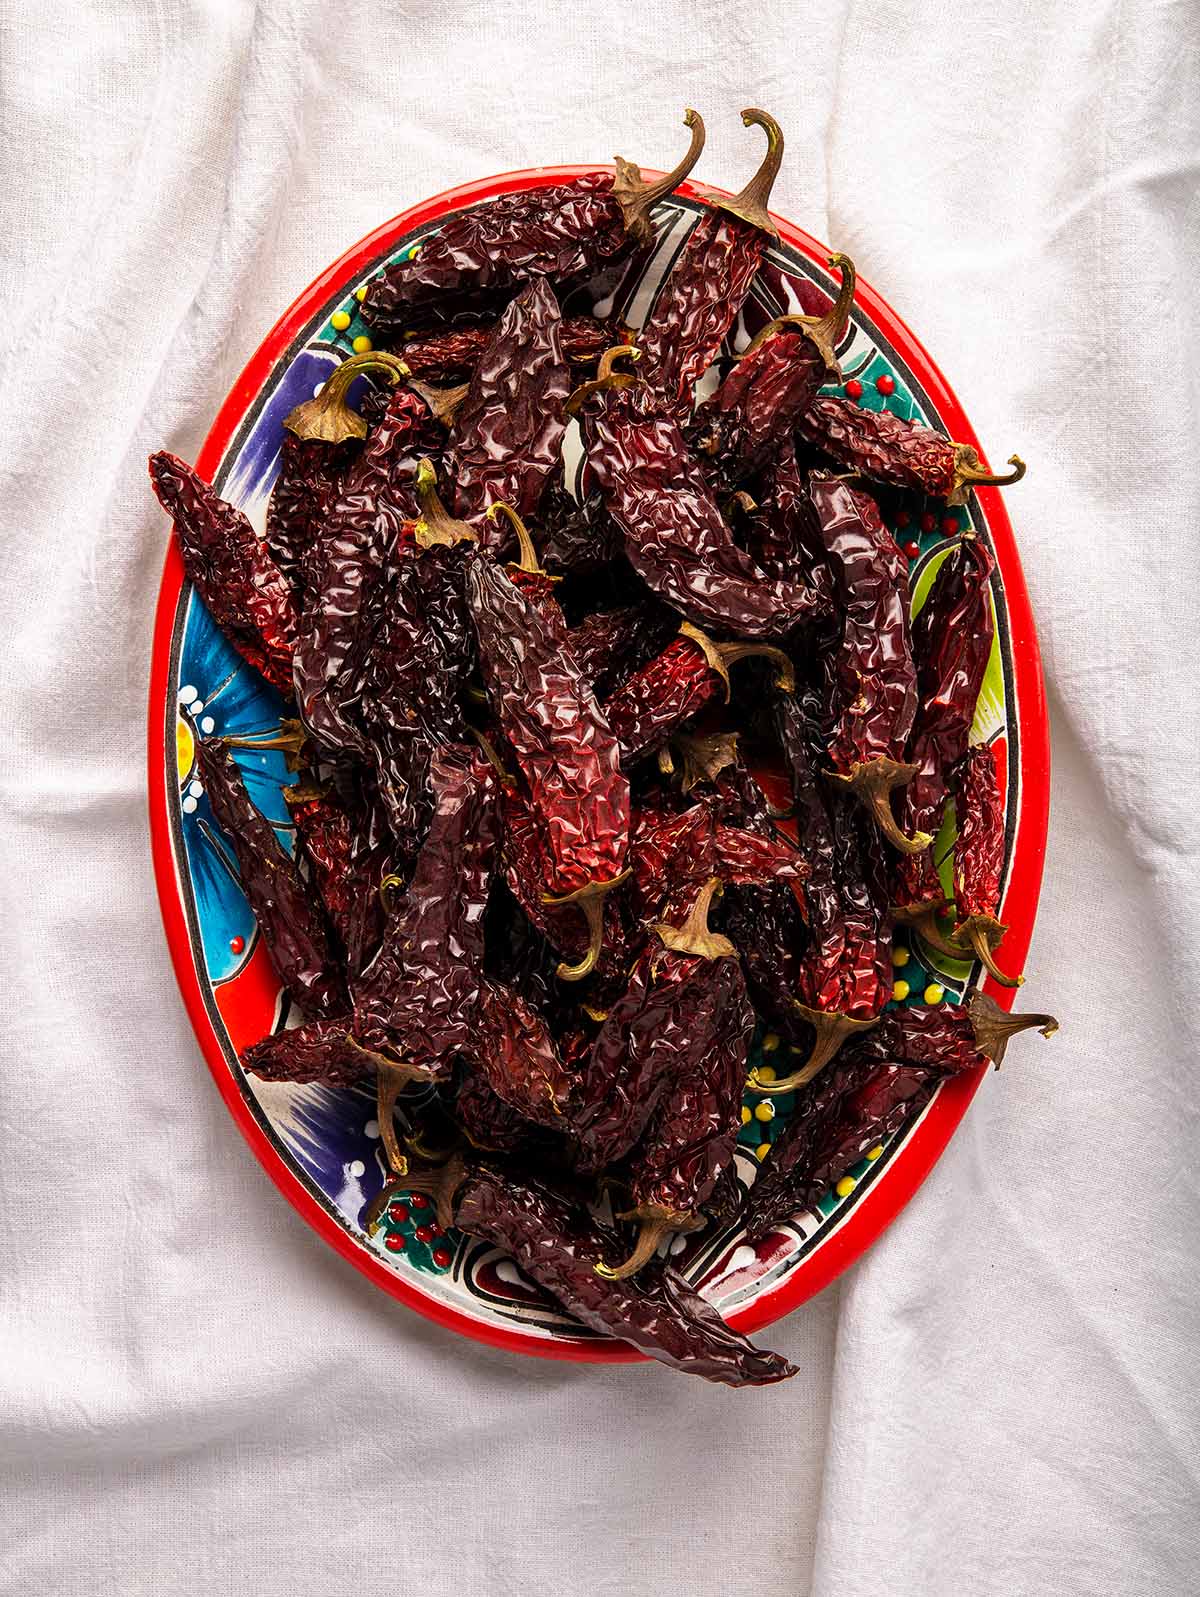 Chipotle peppers in a bowl on a kitchen cloth. 